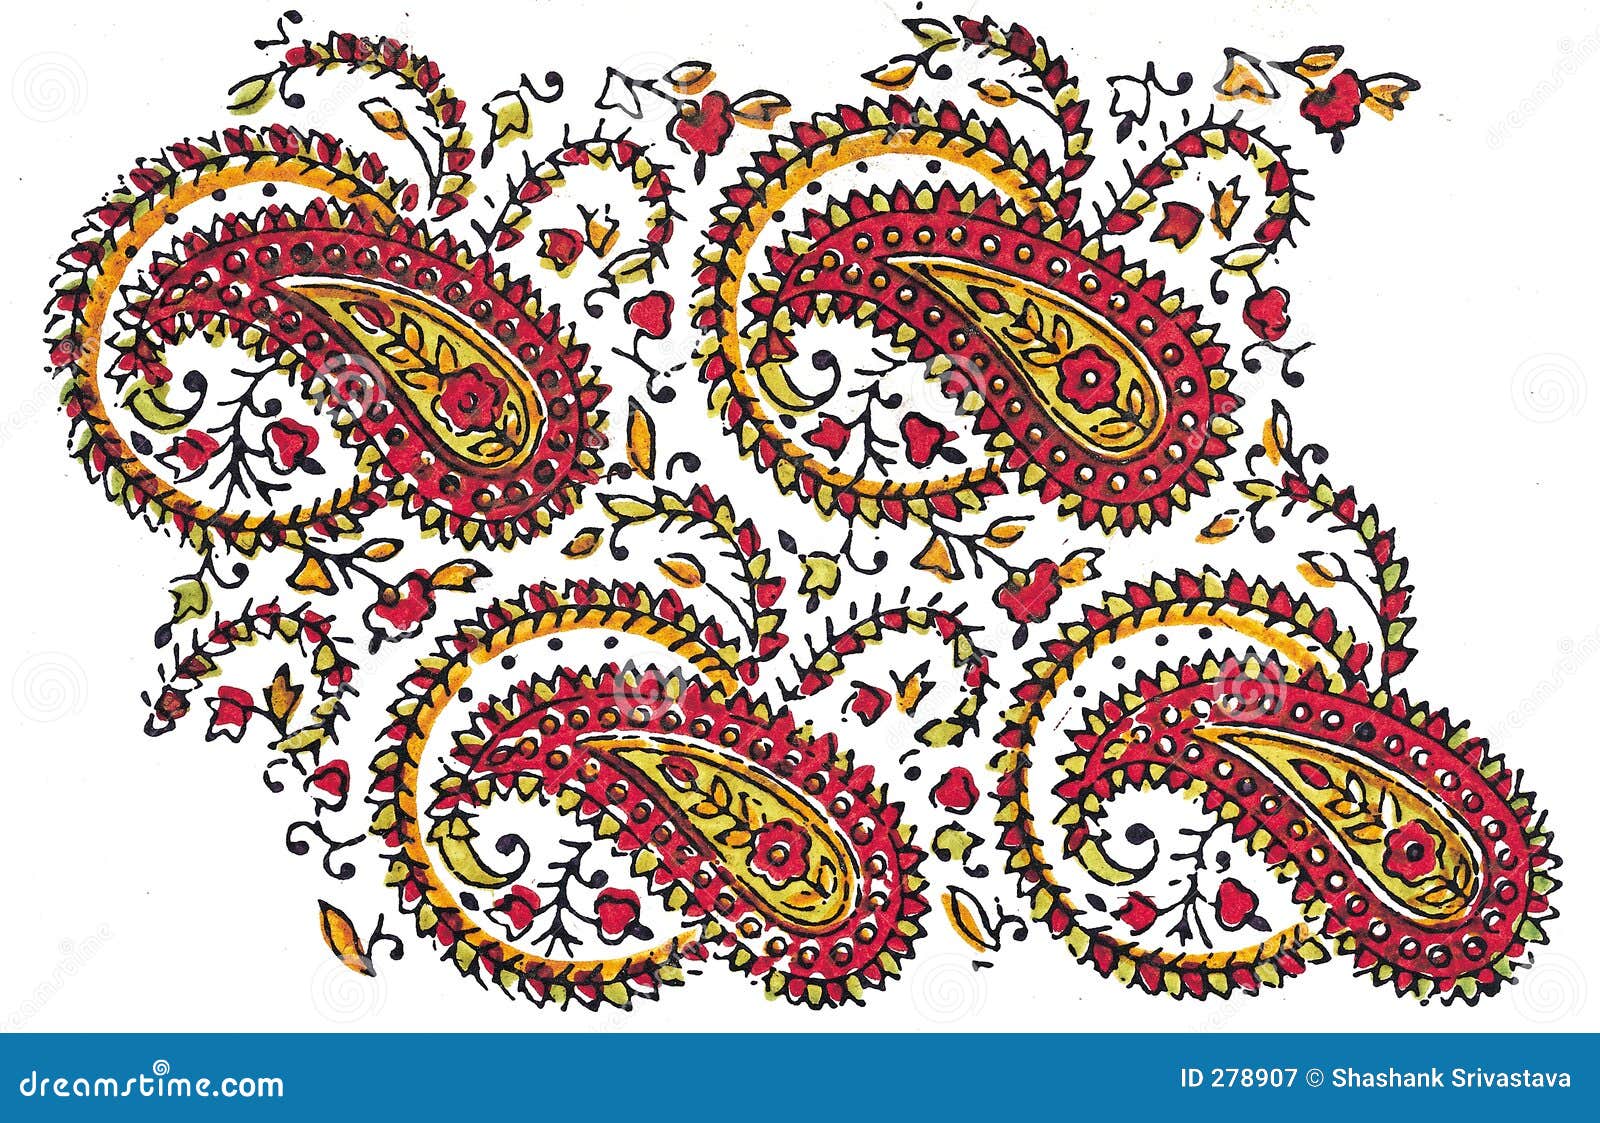  Indian  Traditional Textile Design  Stock Illustration 